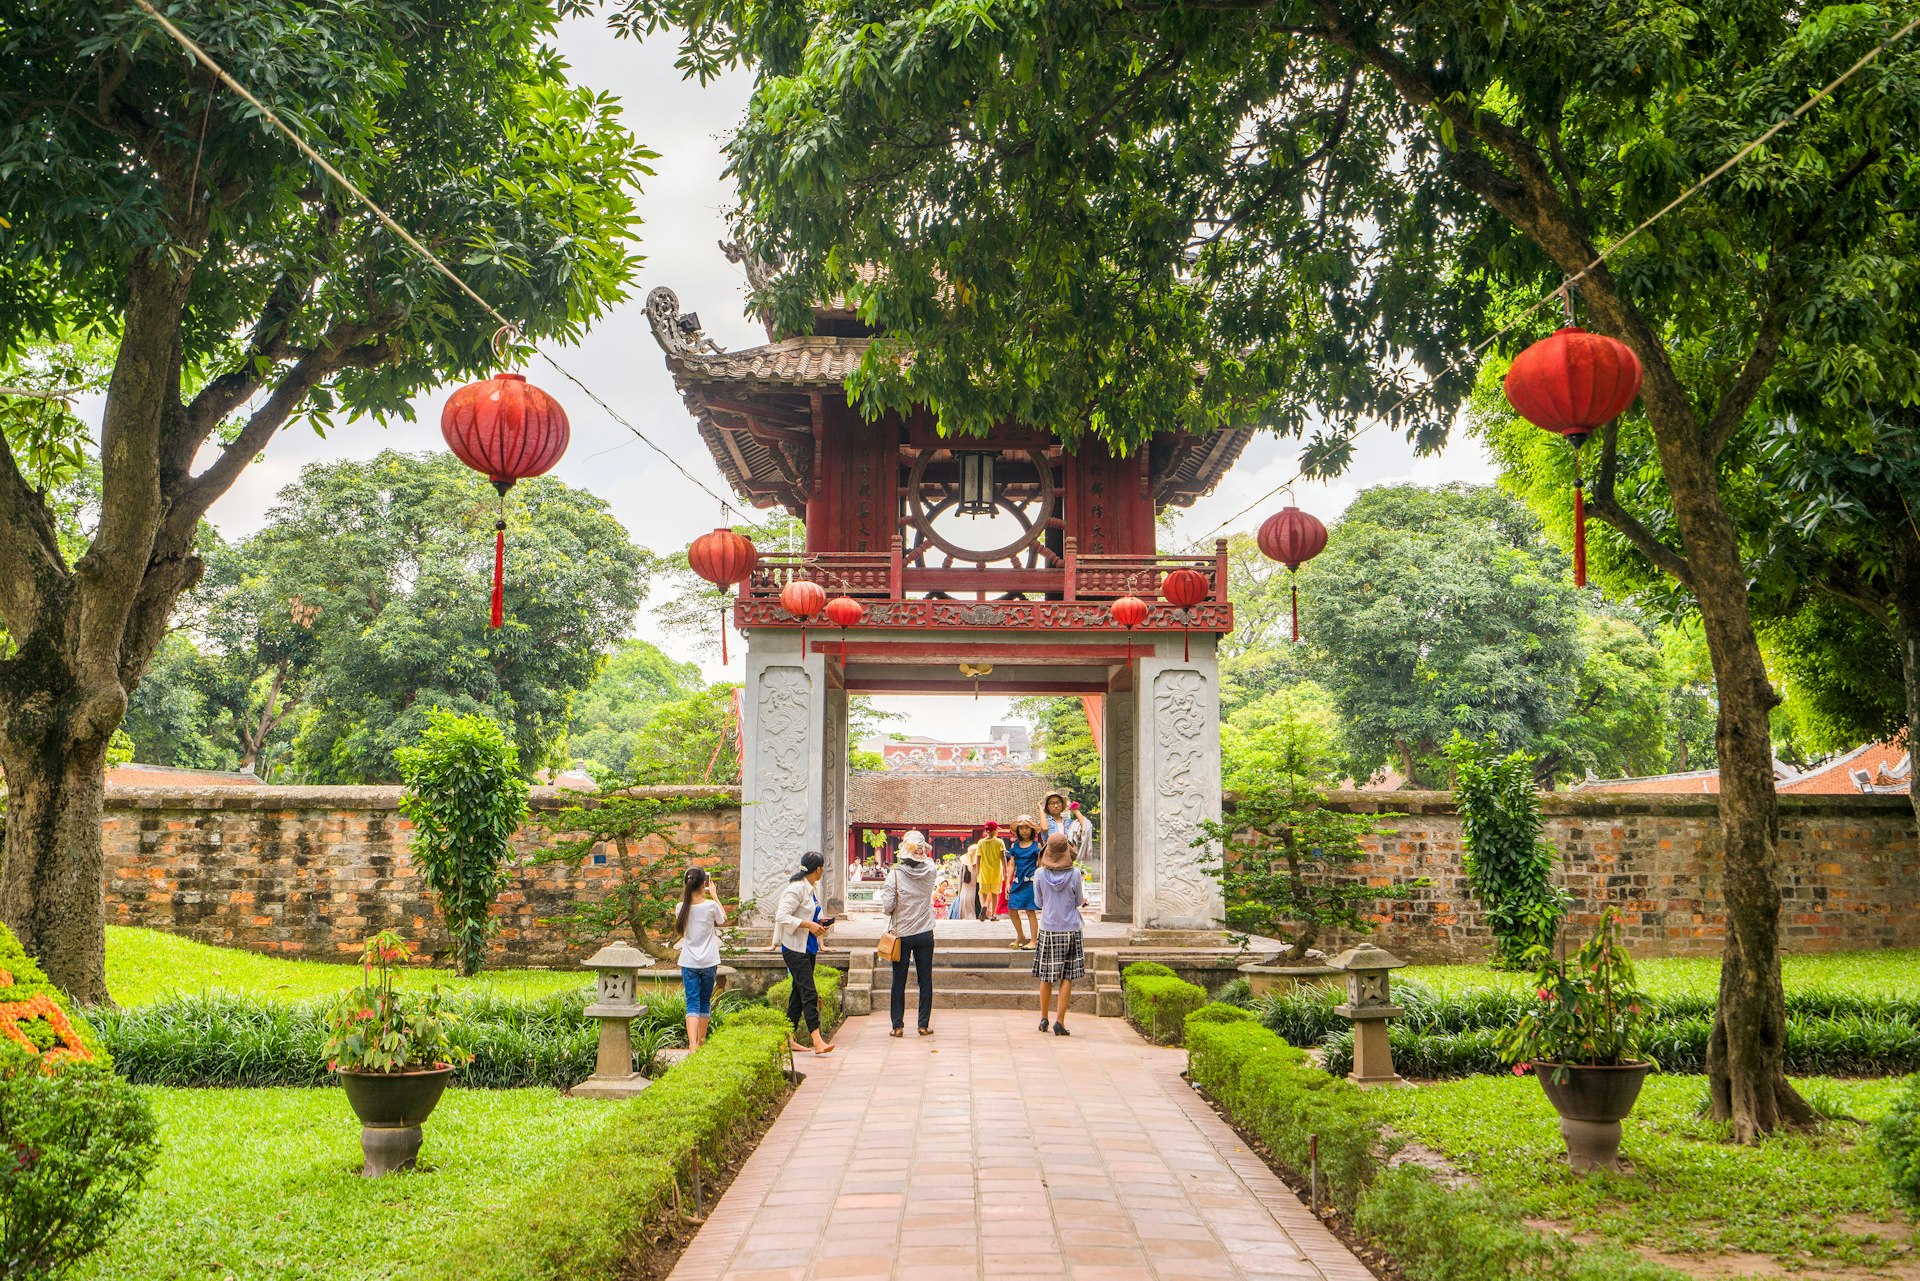 A path leads to a huge decorative gateway with a red pagoda-style roof in manicured gardens